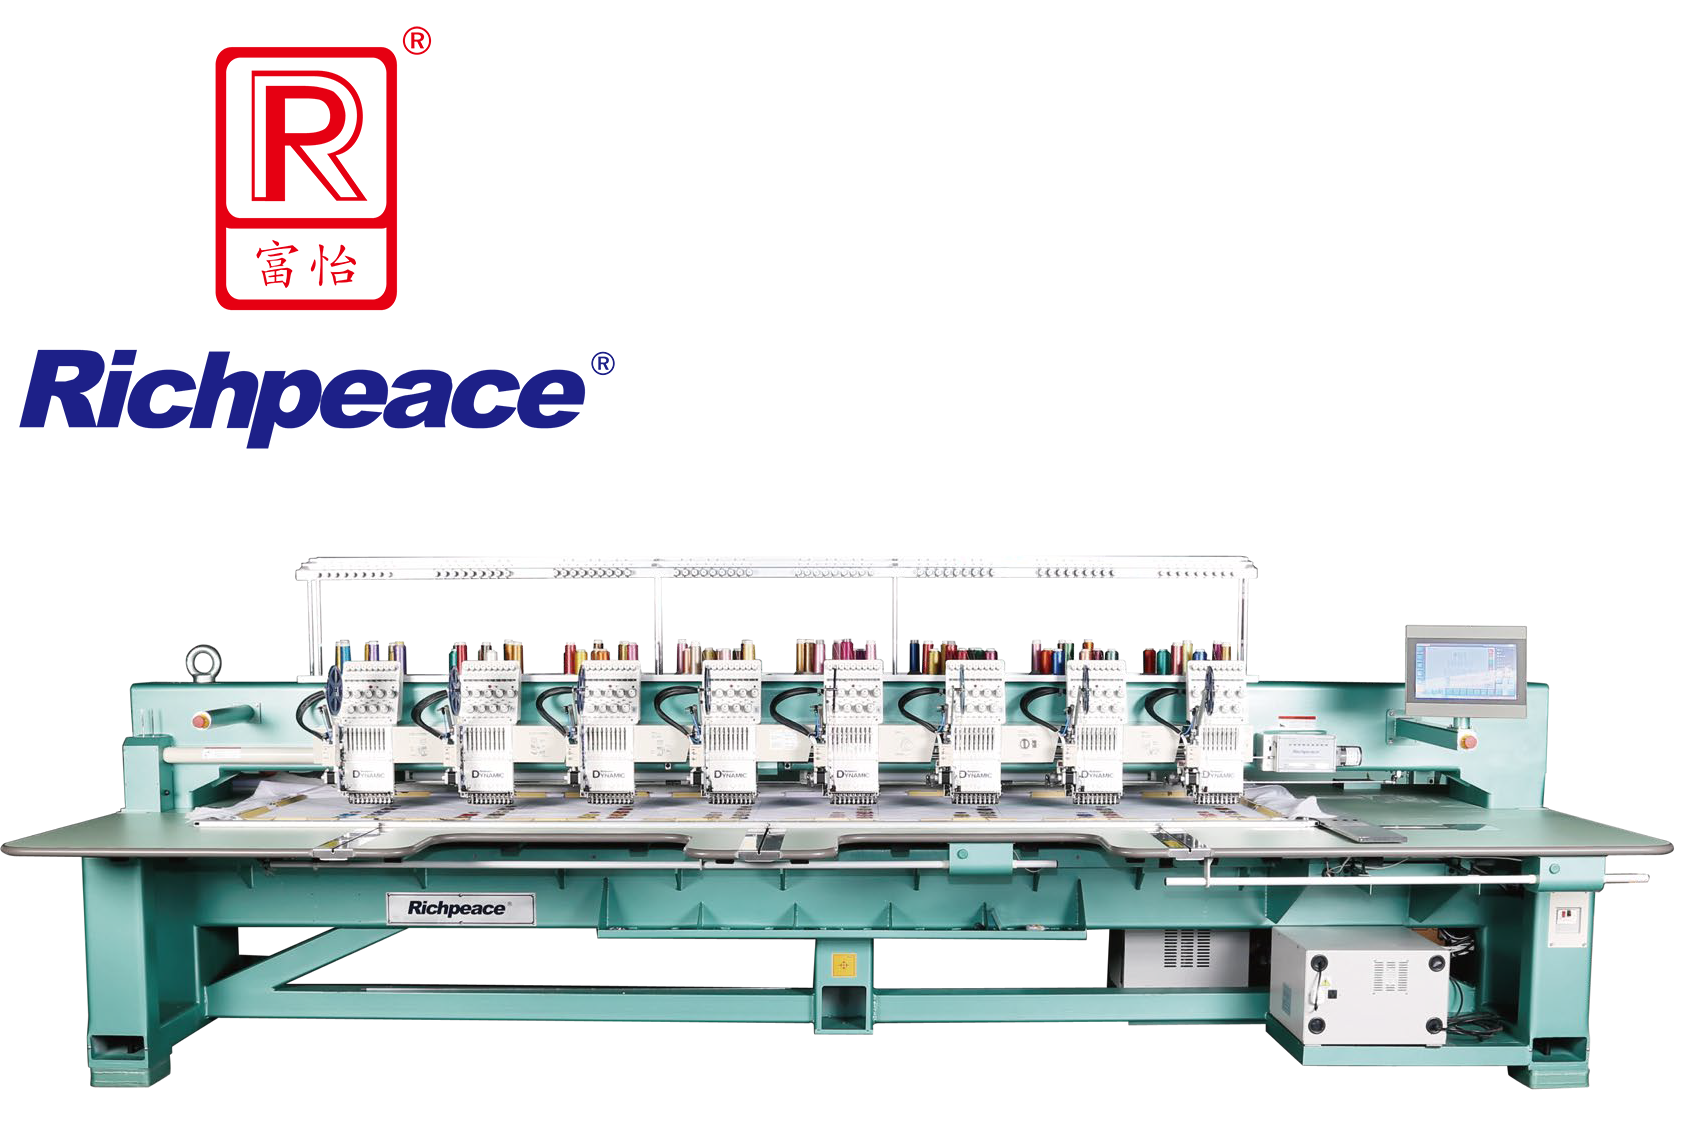 8 Heads Embroidery Machine(Optional 4 colors / 6 colors / 9 colors / 12 colors / 15 colors, according to machine heads distance)